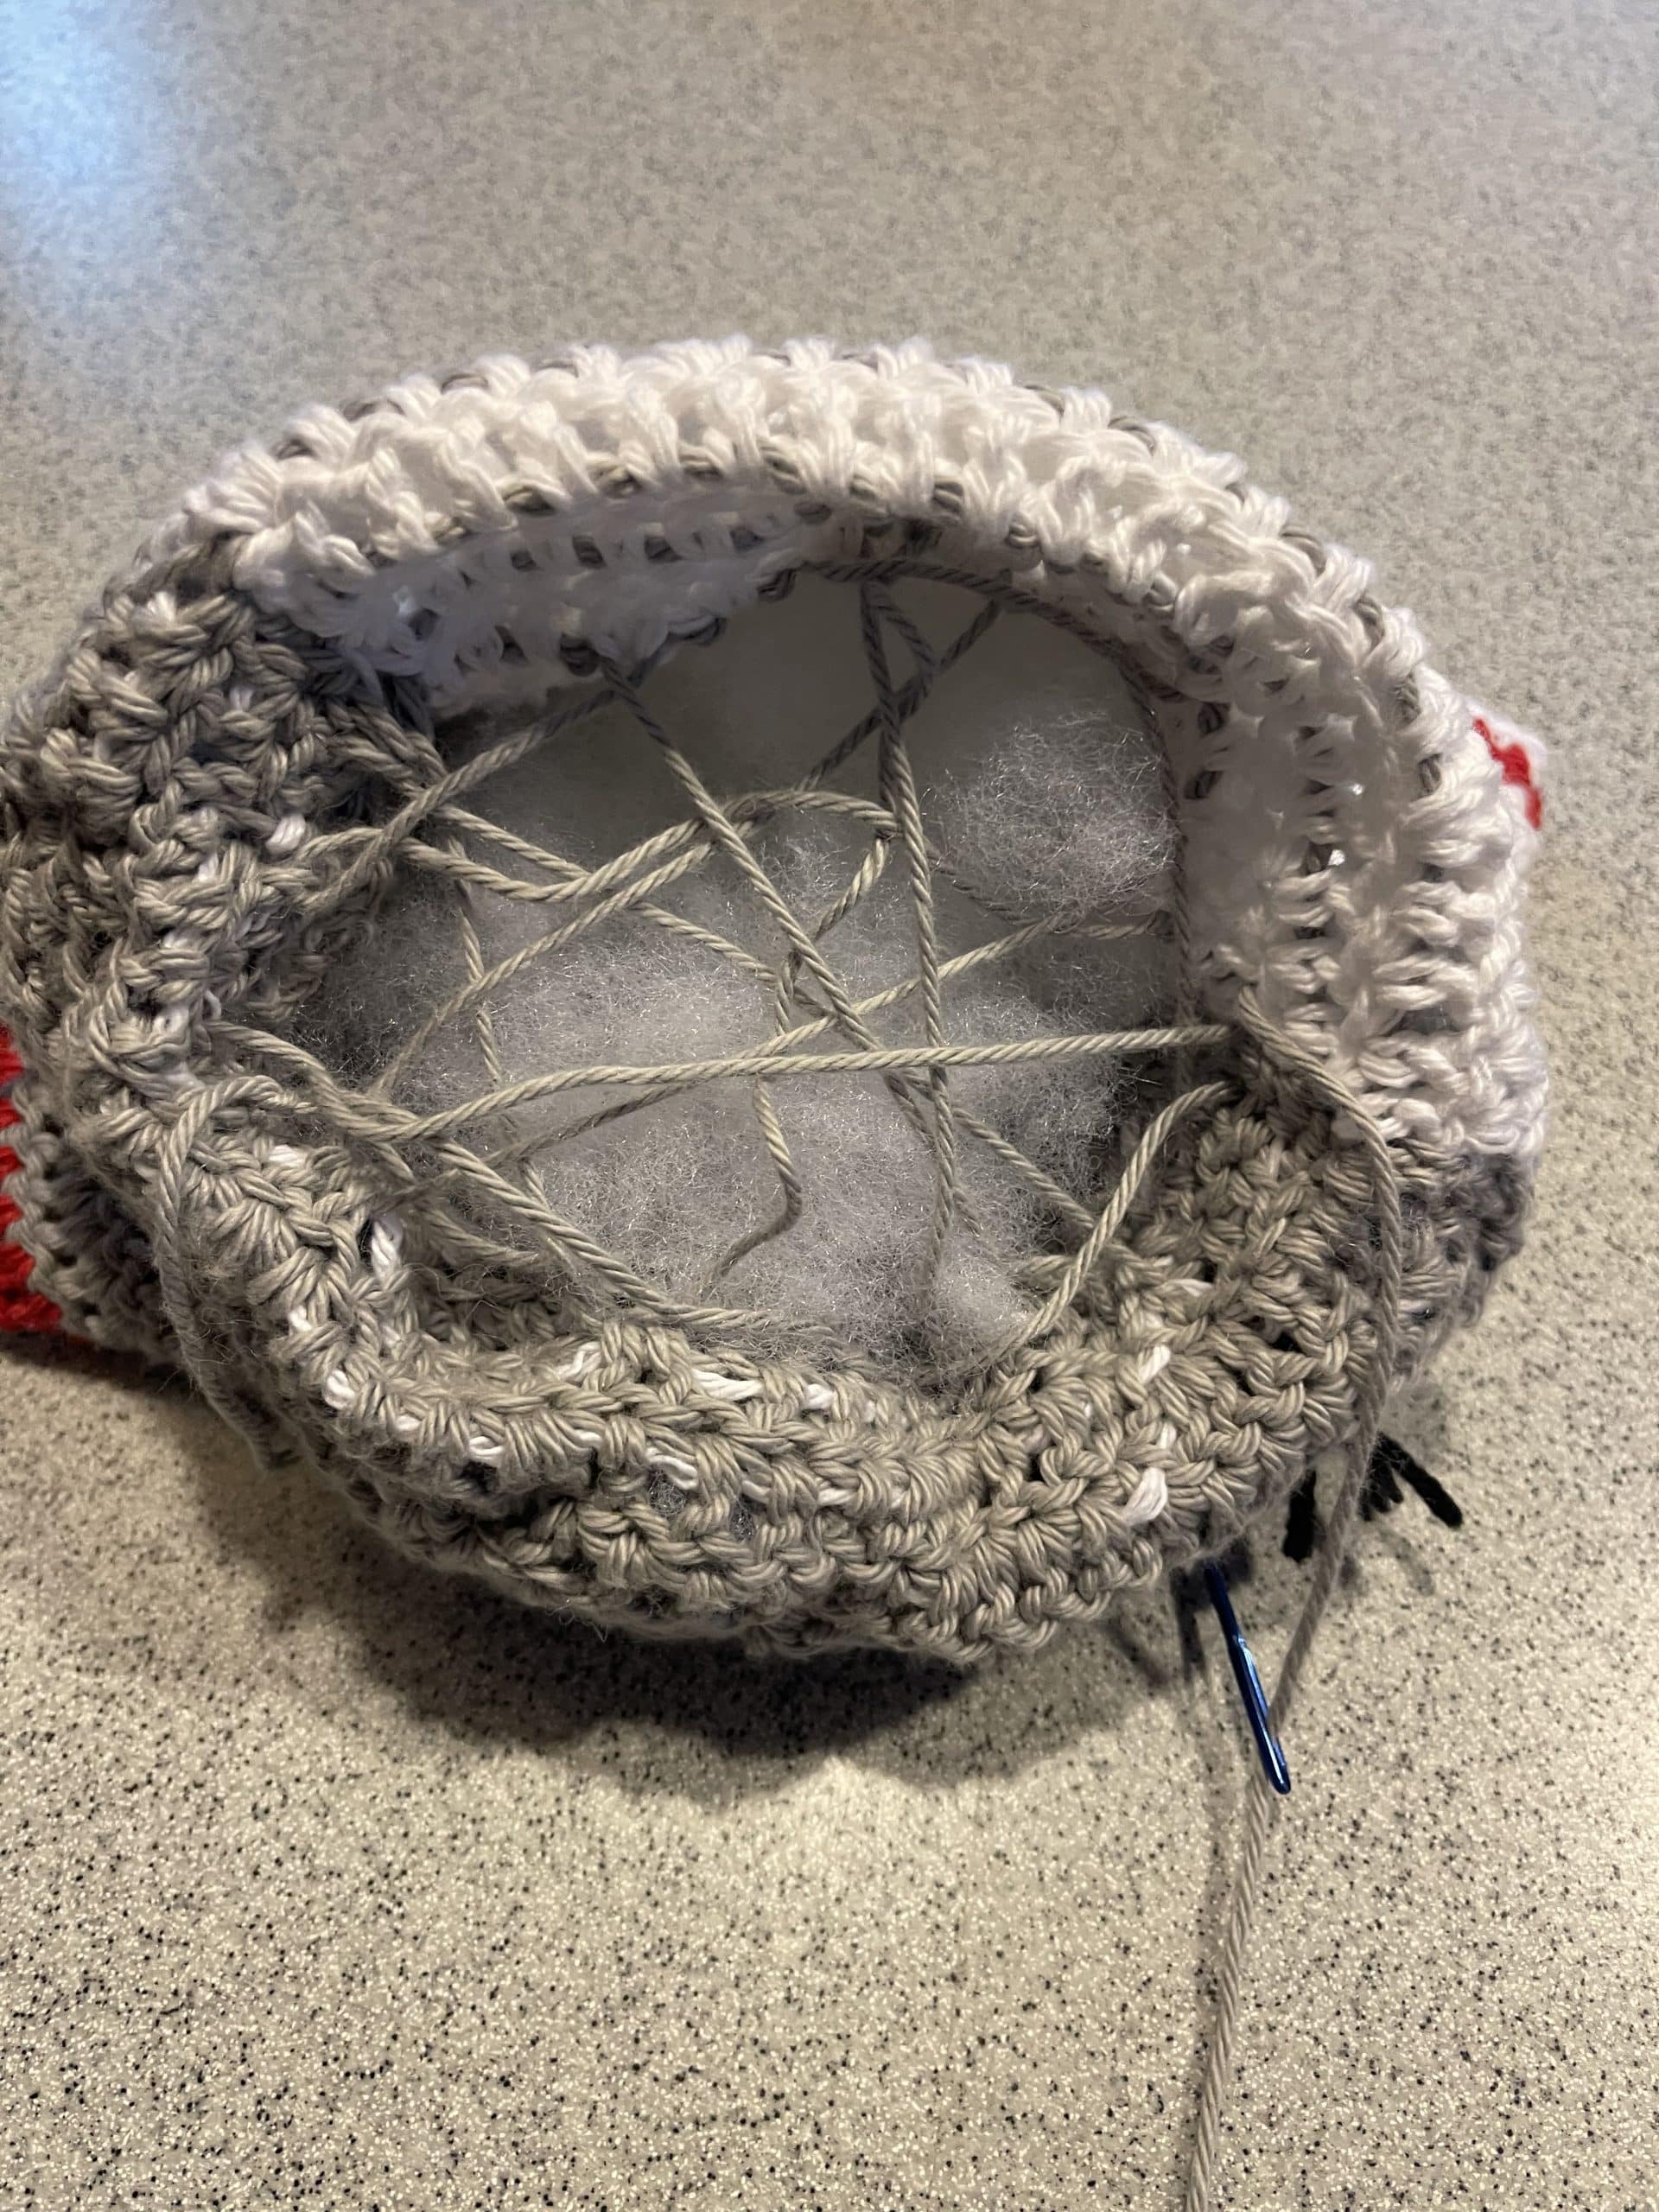 web of yarn to keep stuffing in